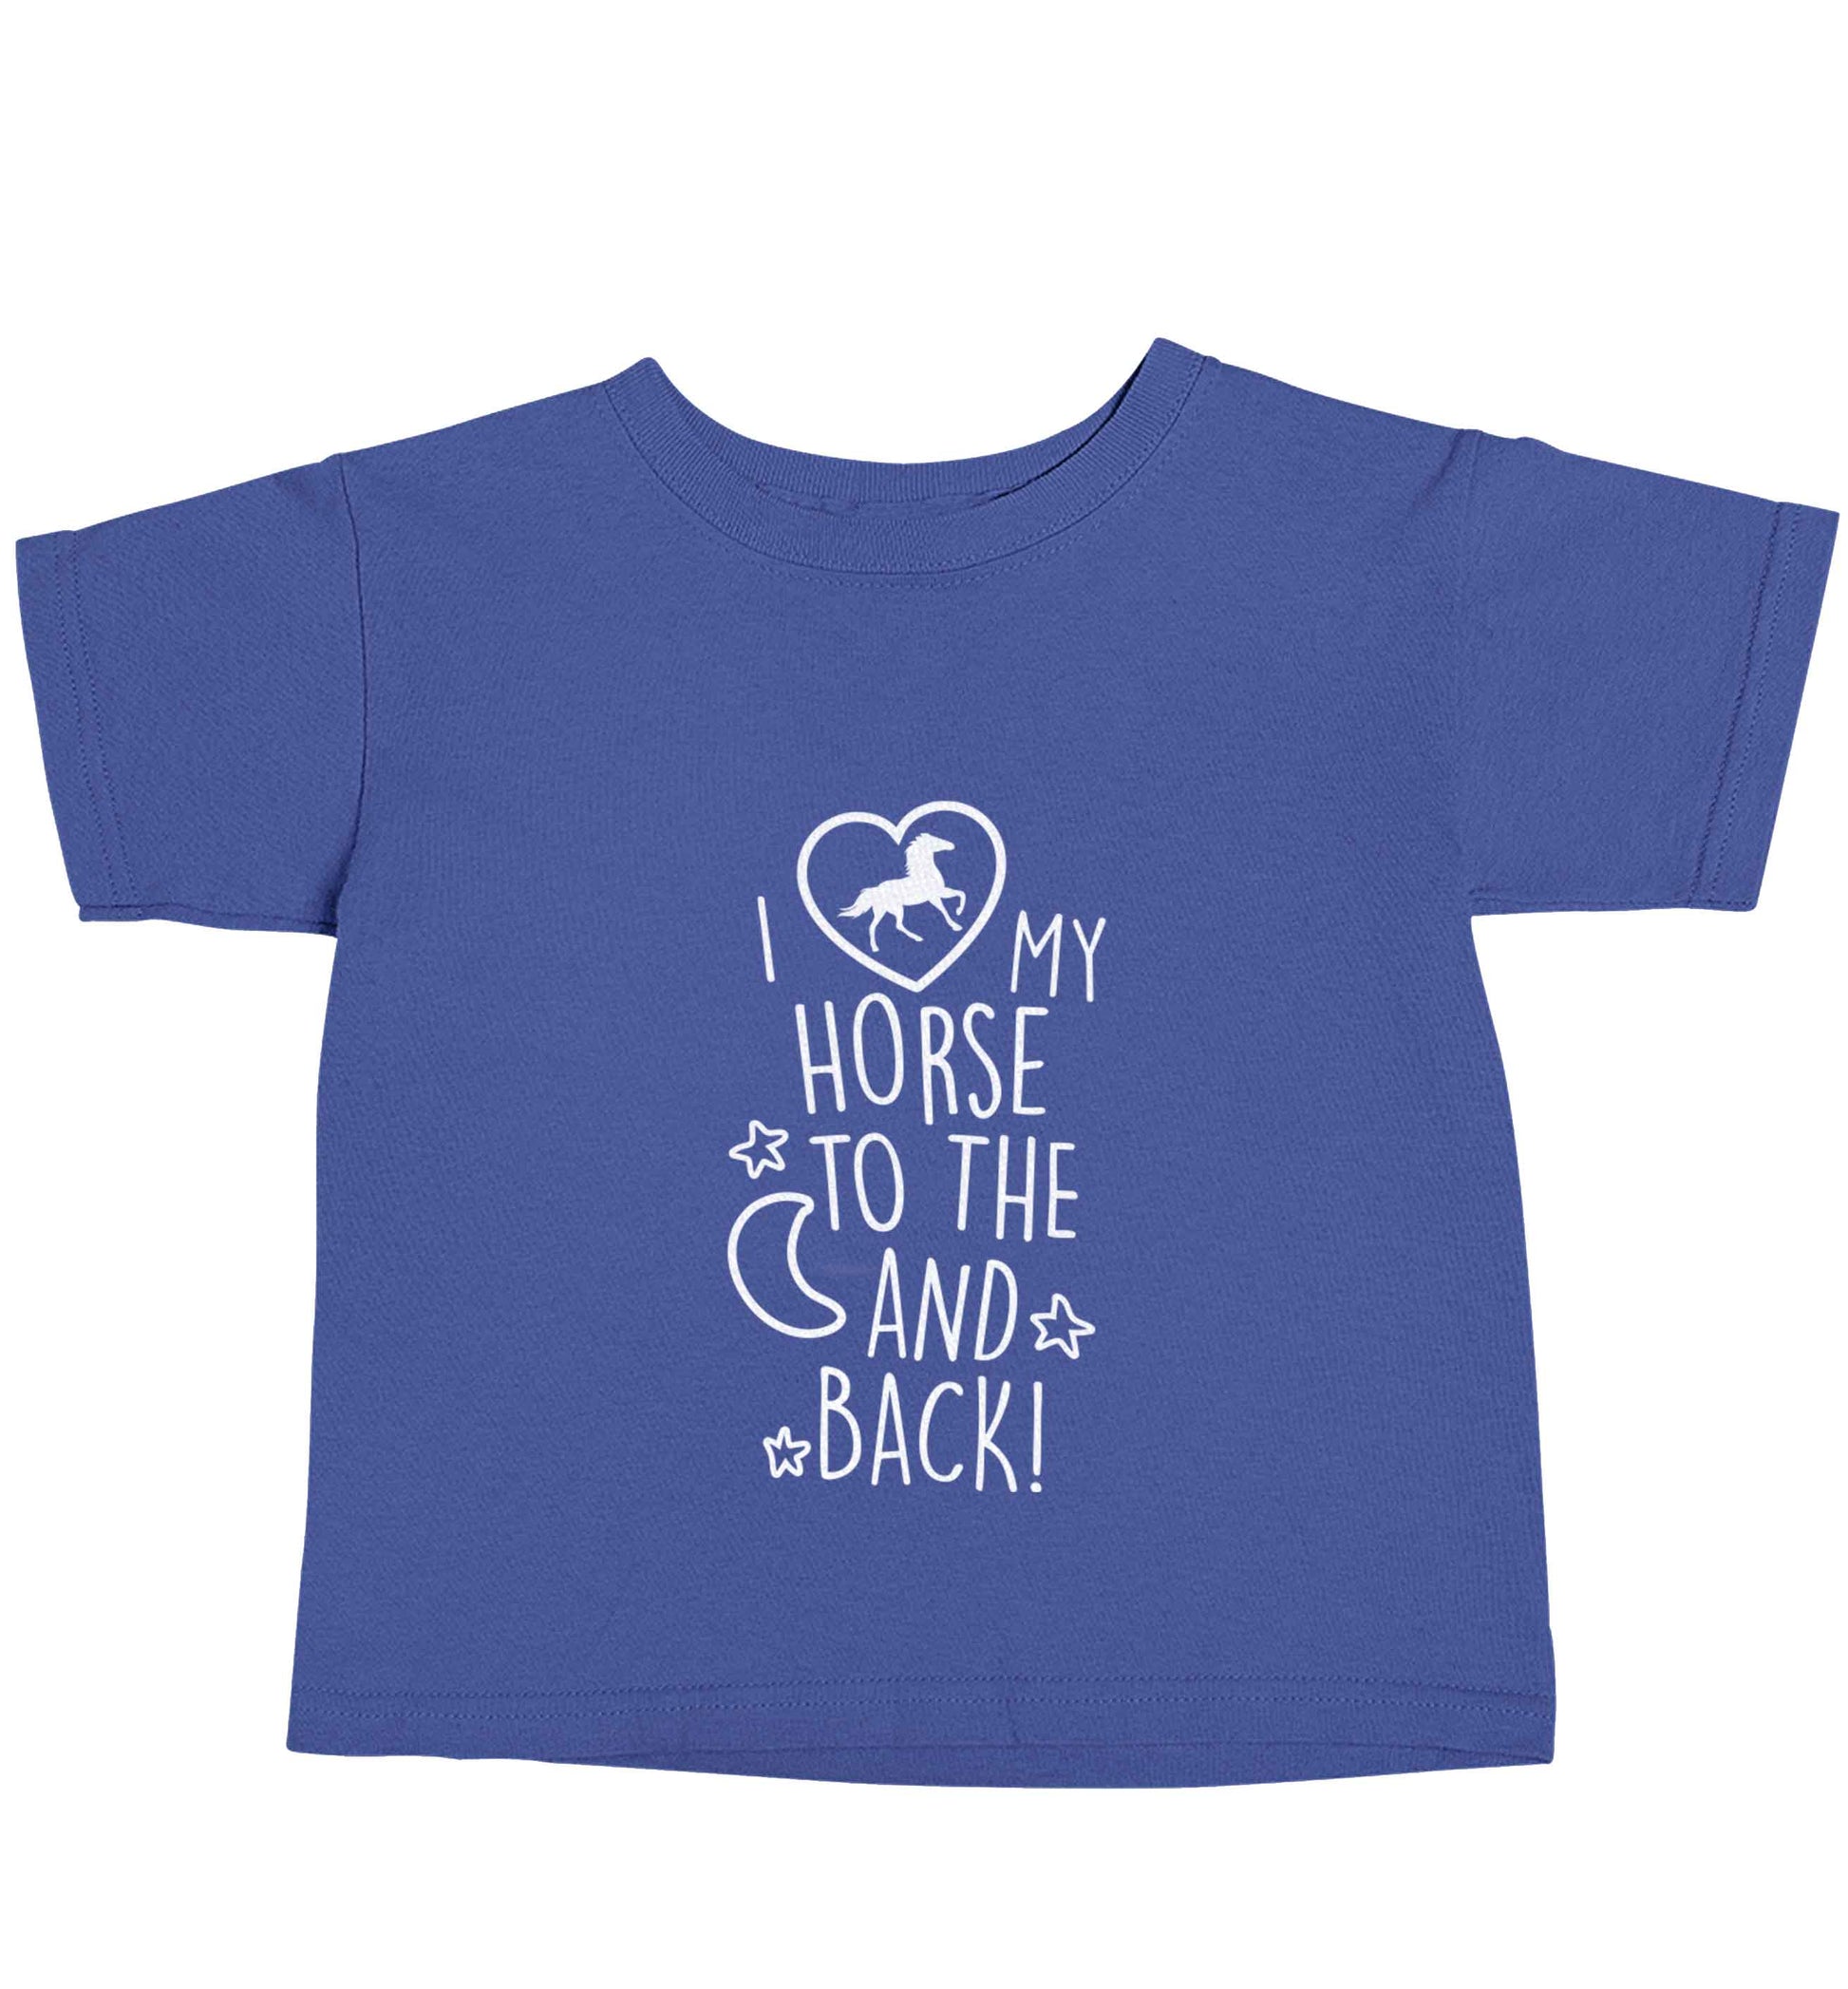 I love my horse to the moon and back blue baby toddler Tshirt 2 Years